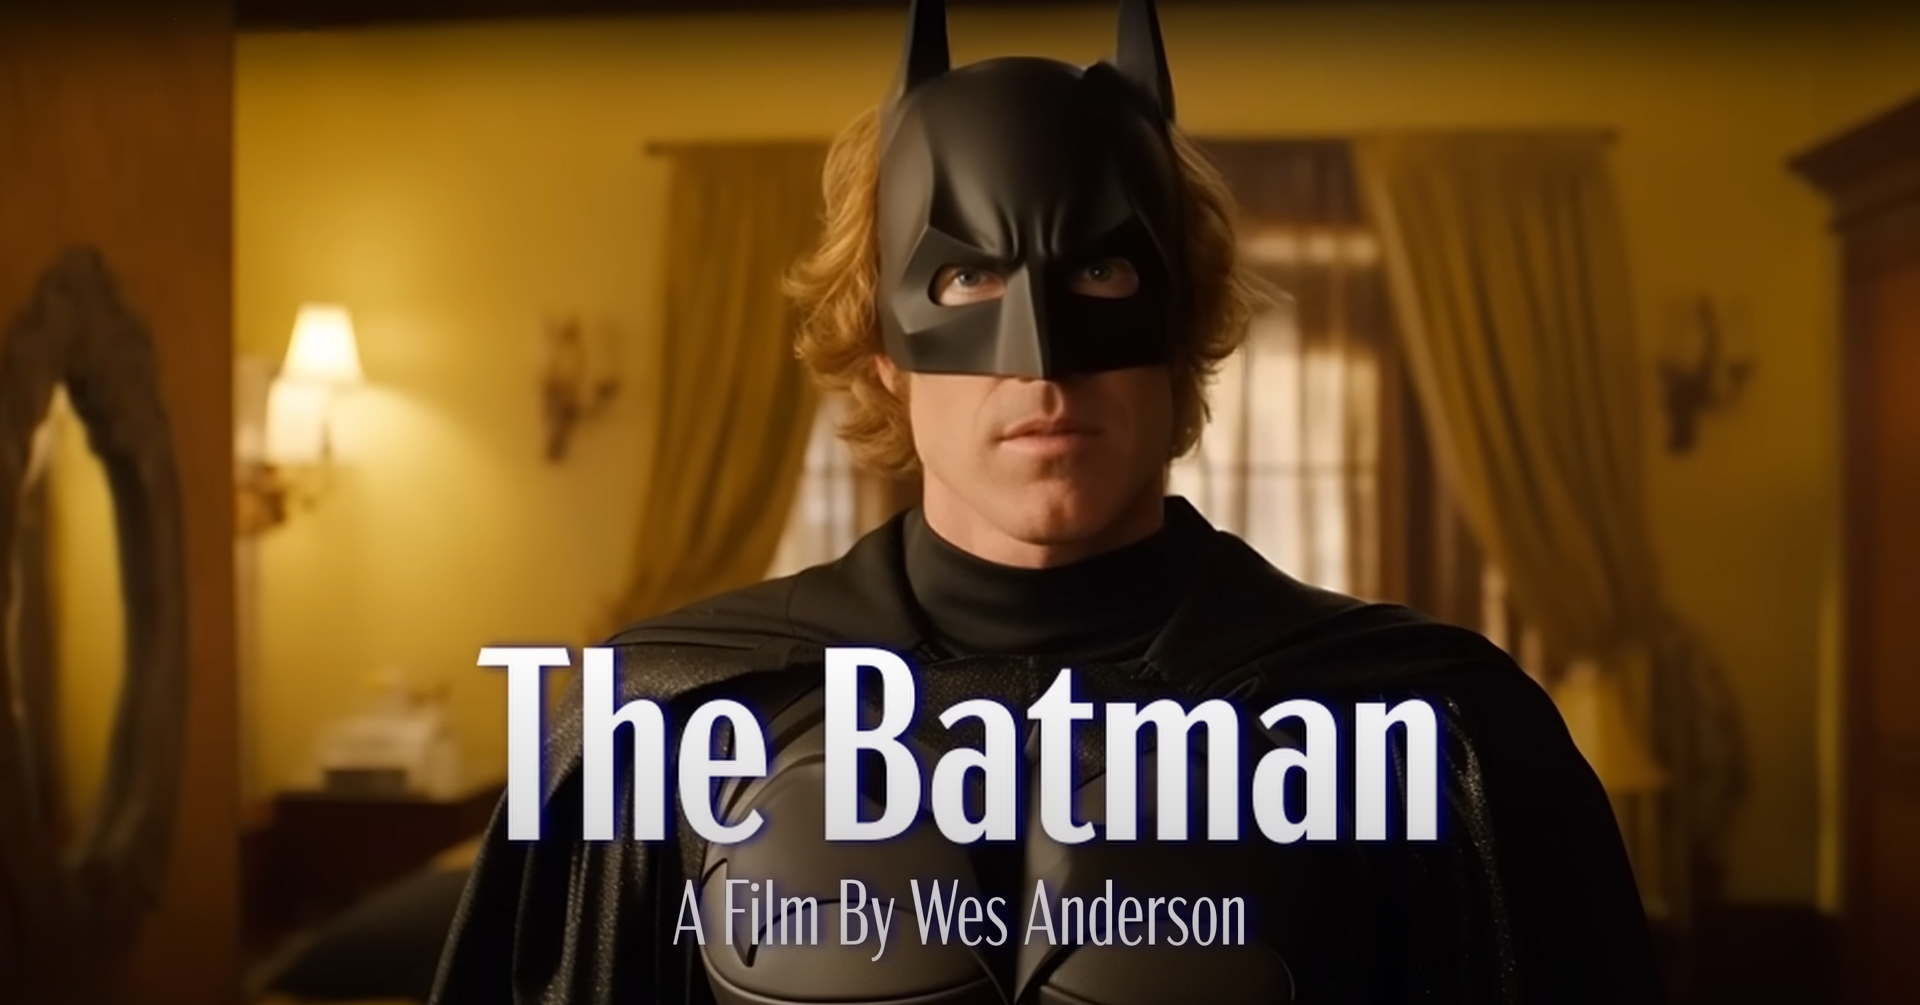 Making of - How the viral Wes Anderson AI videos are created